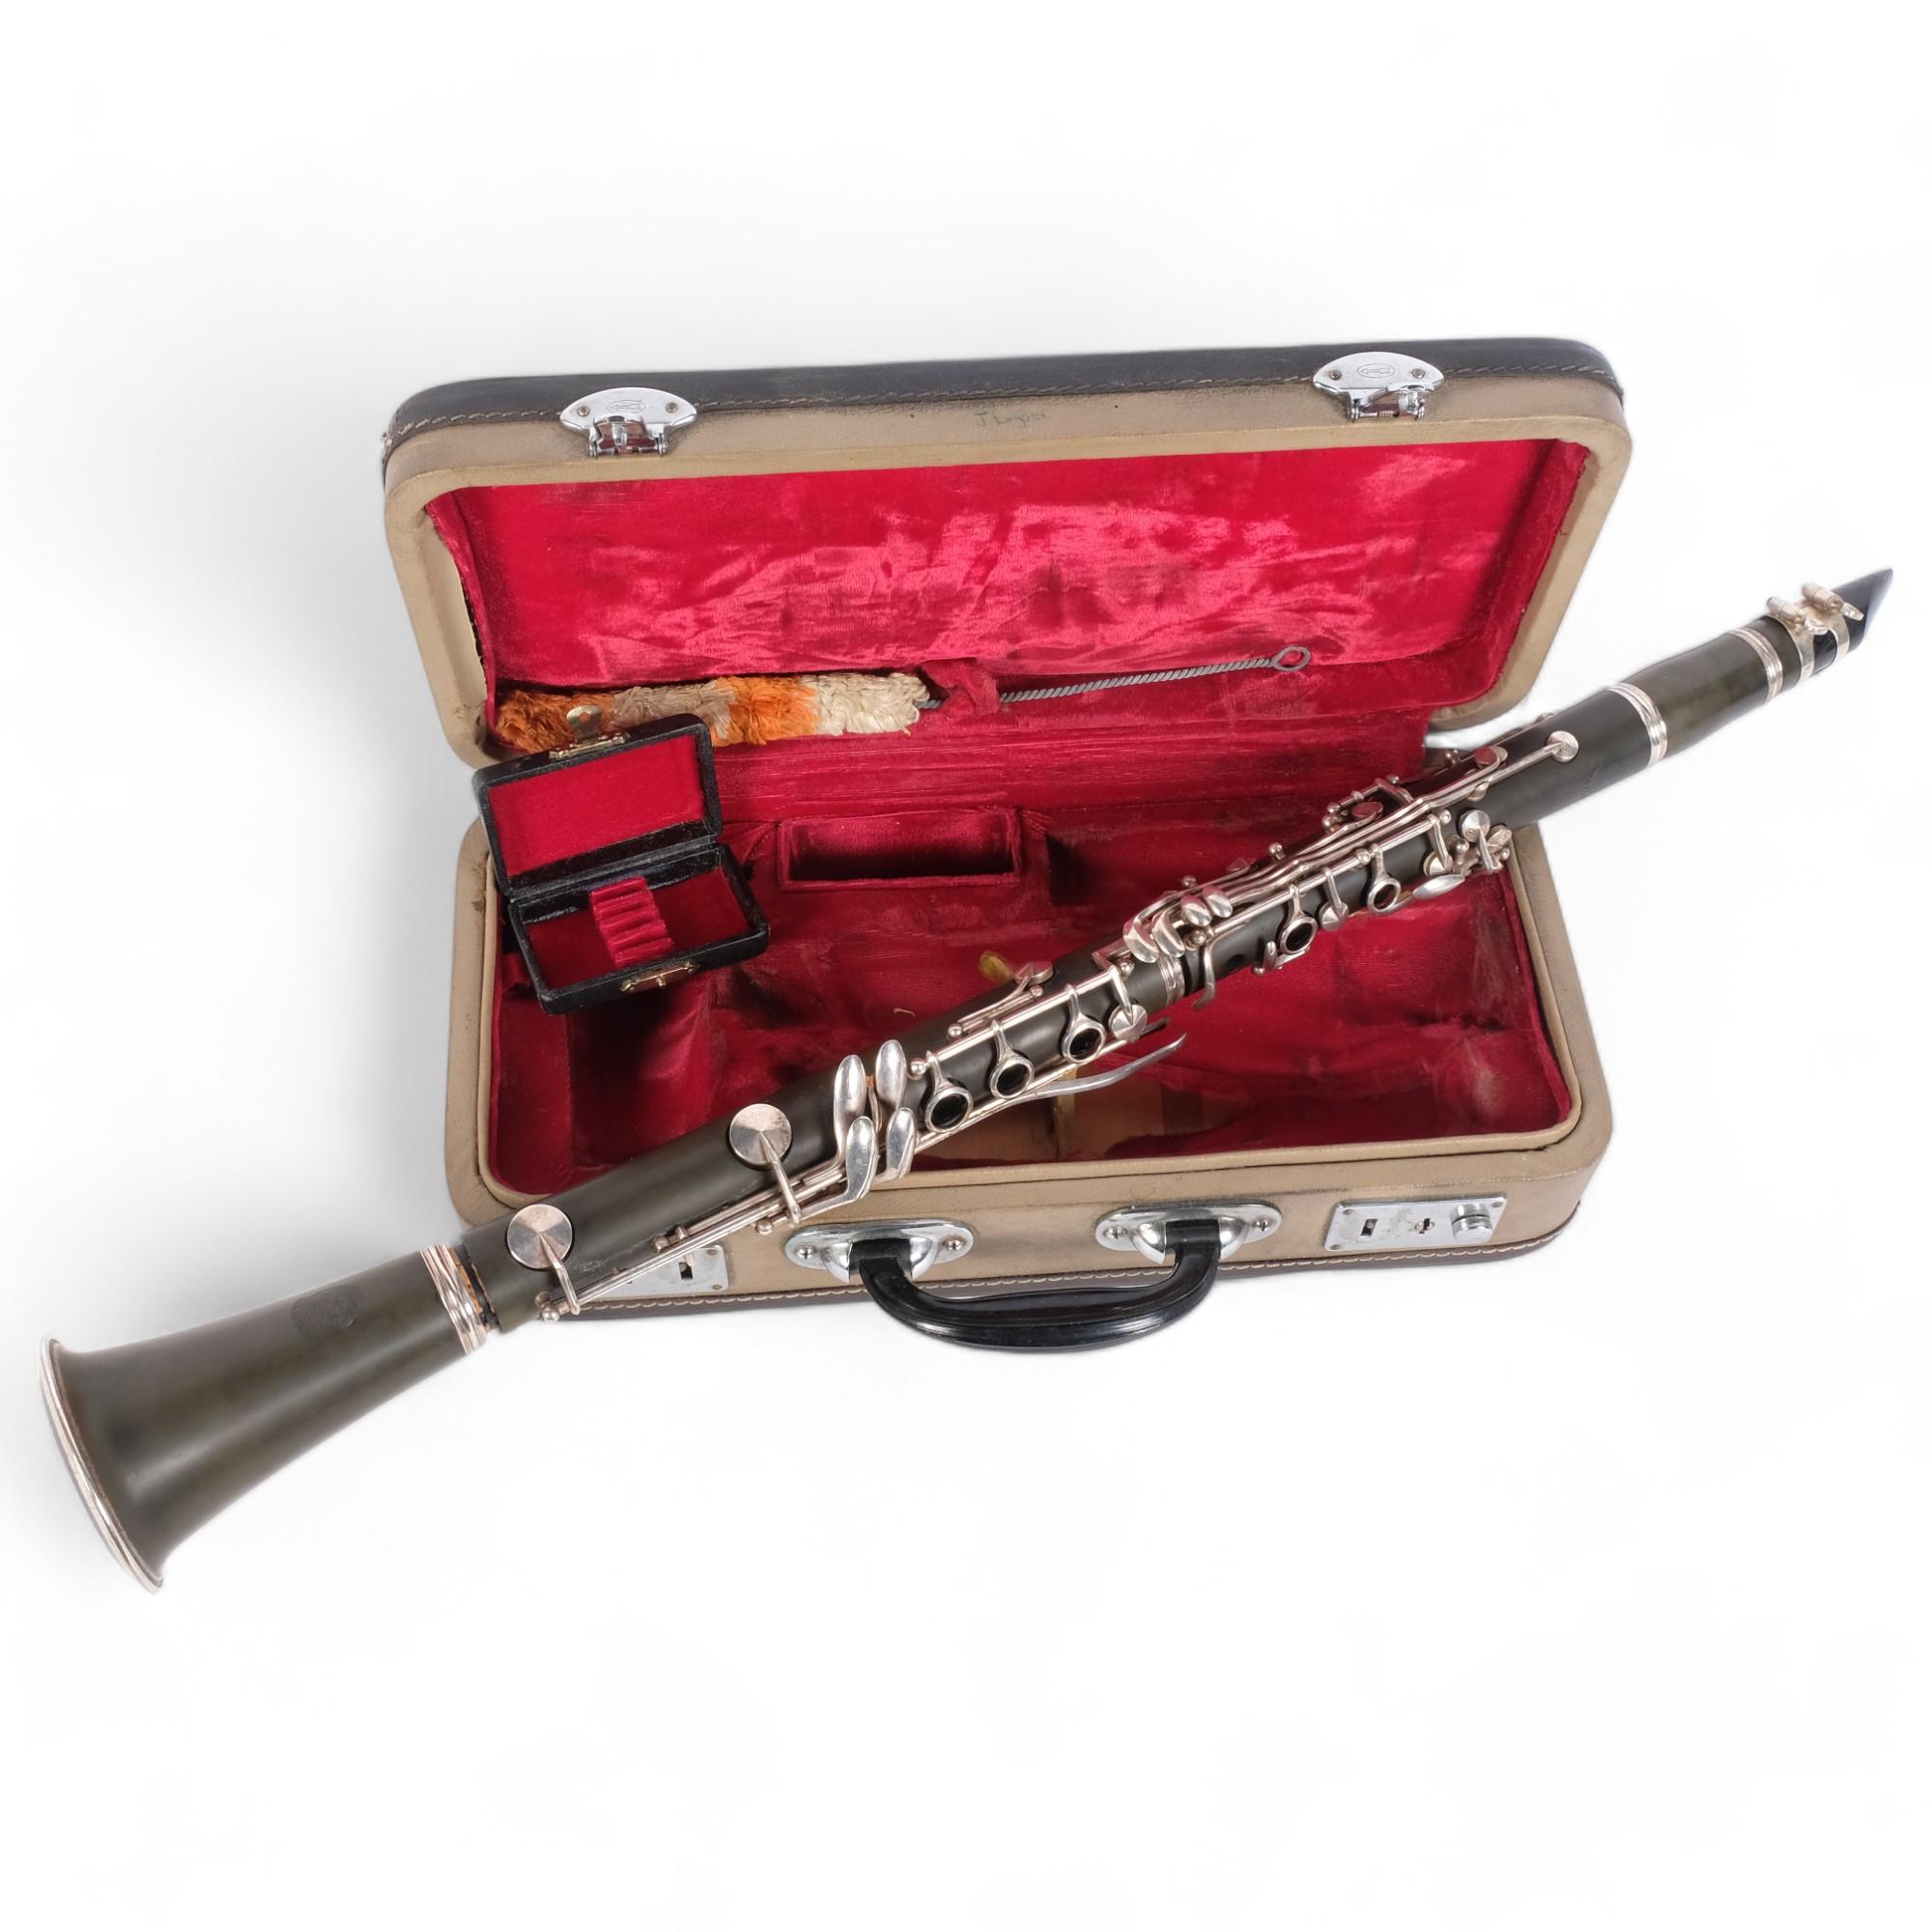 A Hsinghai clarinet, serial no. D130, in original fitted hardshell case